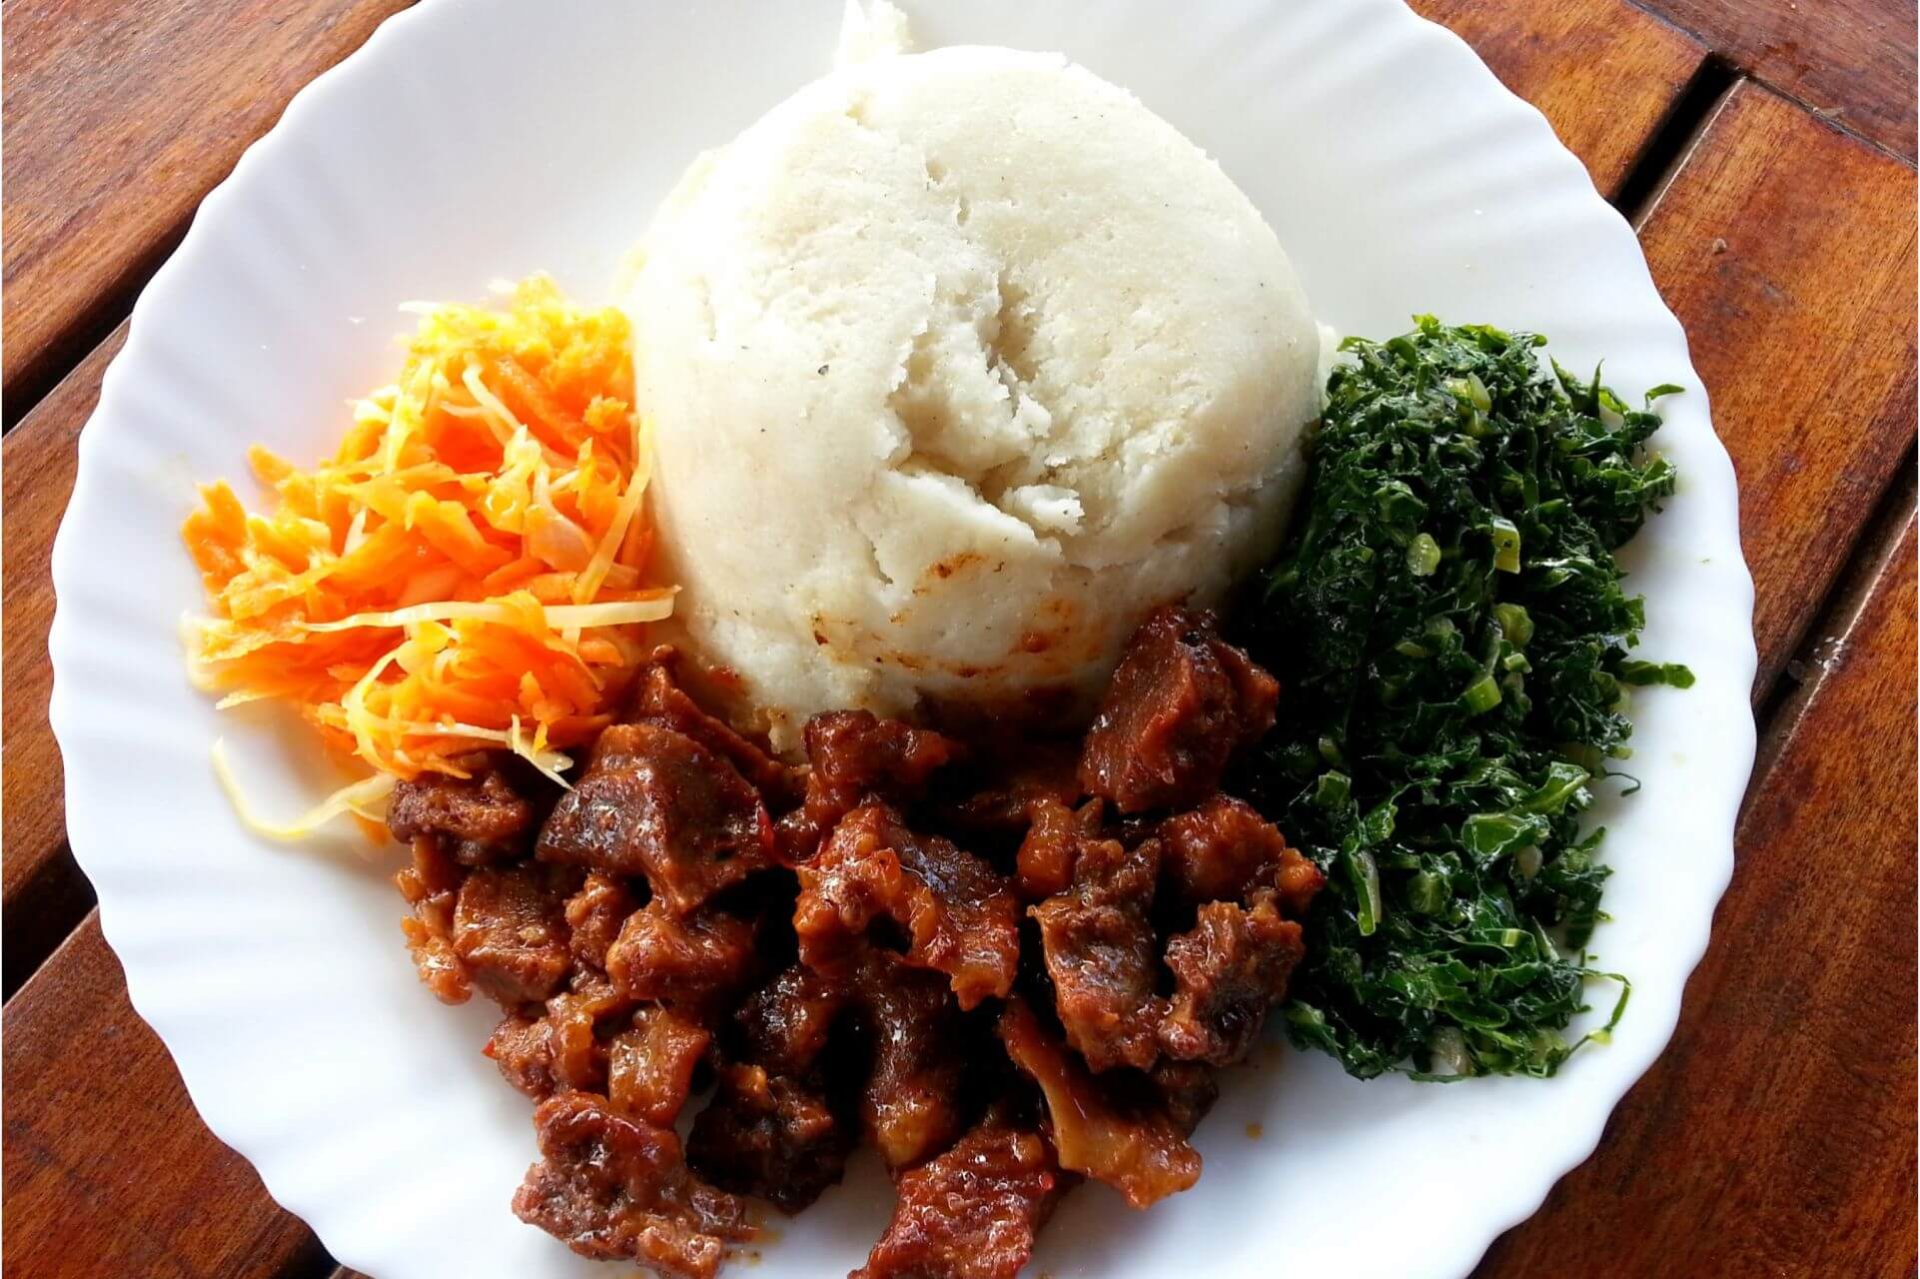 The Best Local Foods to Eat in Kenya